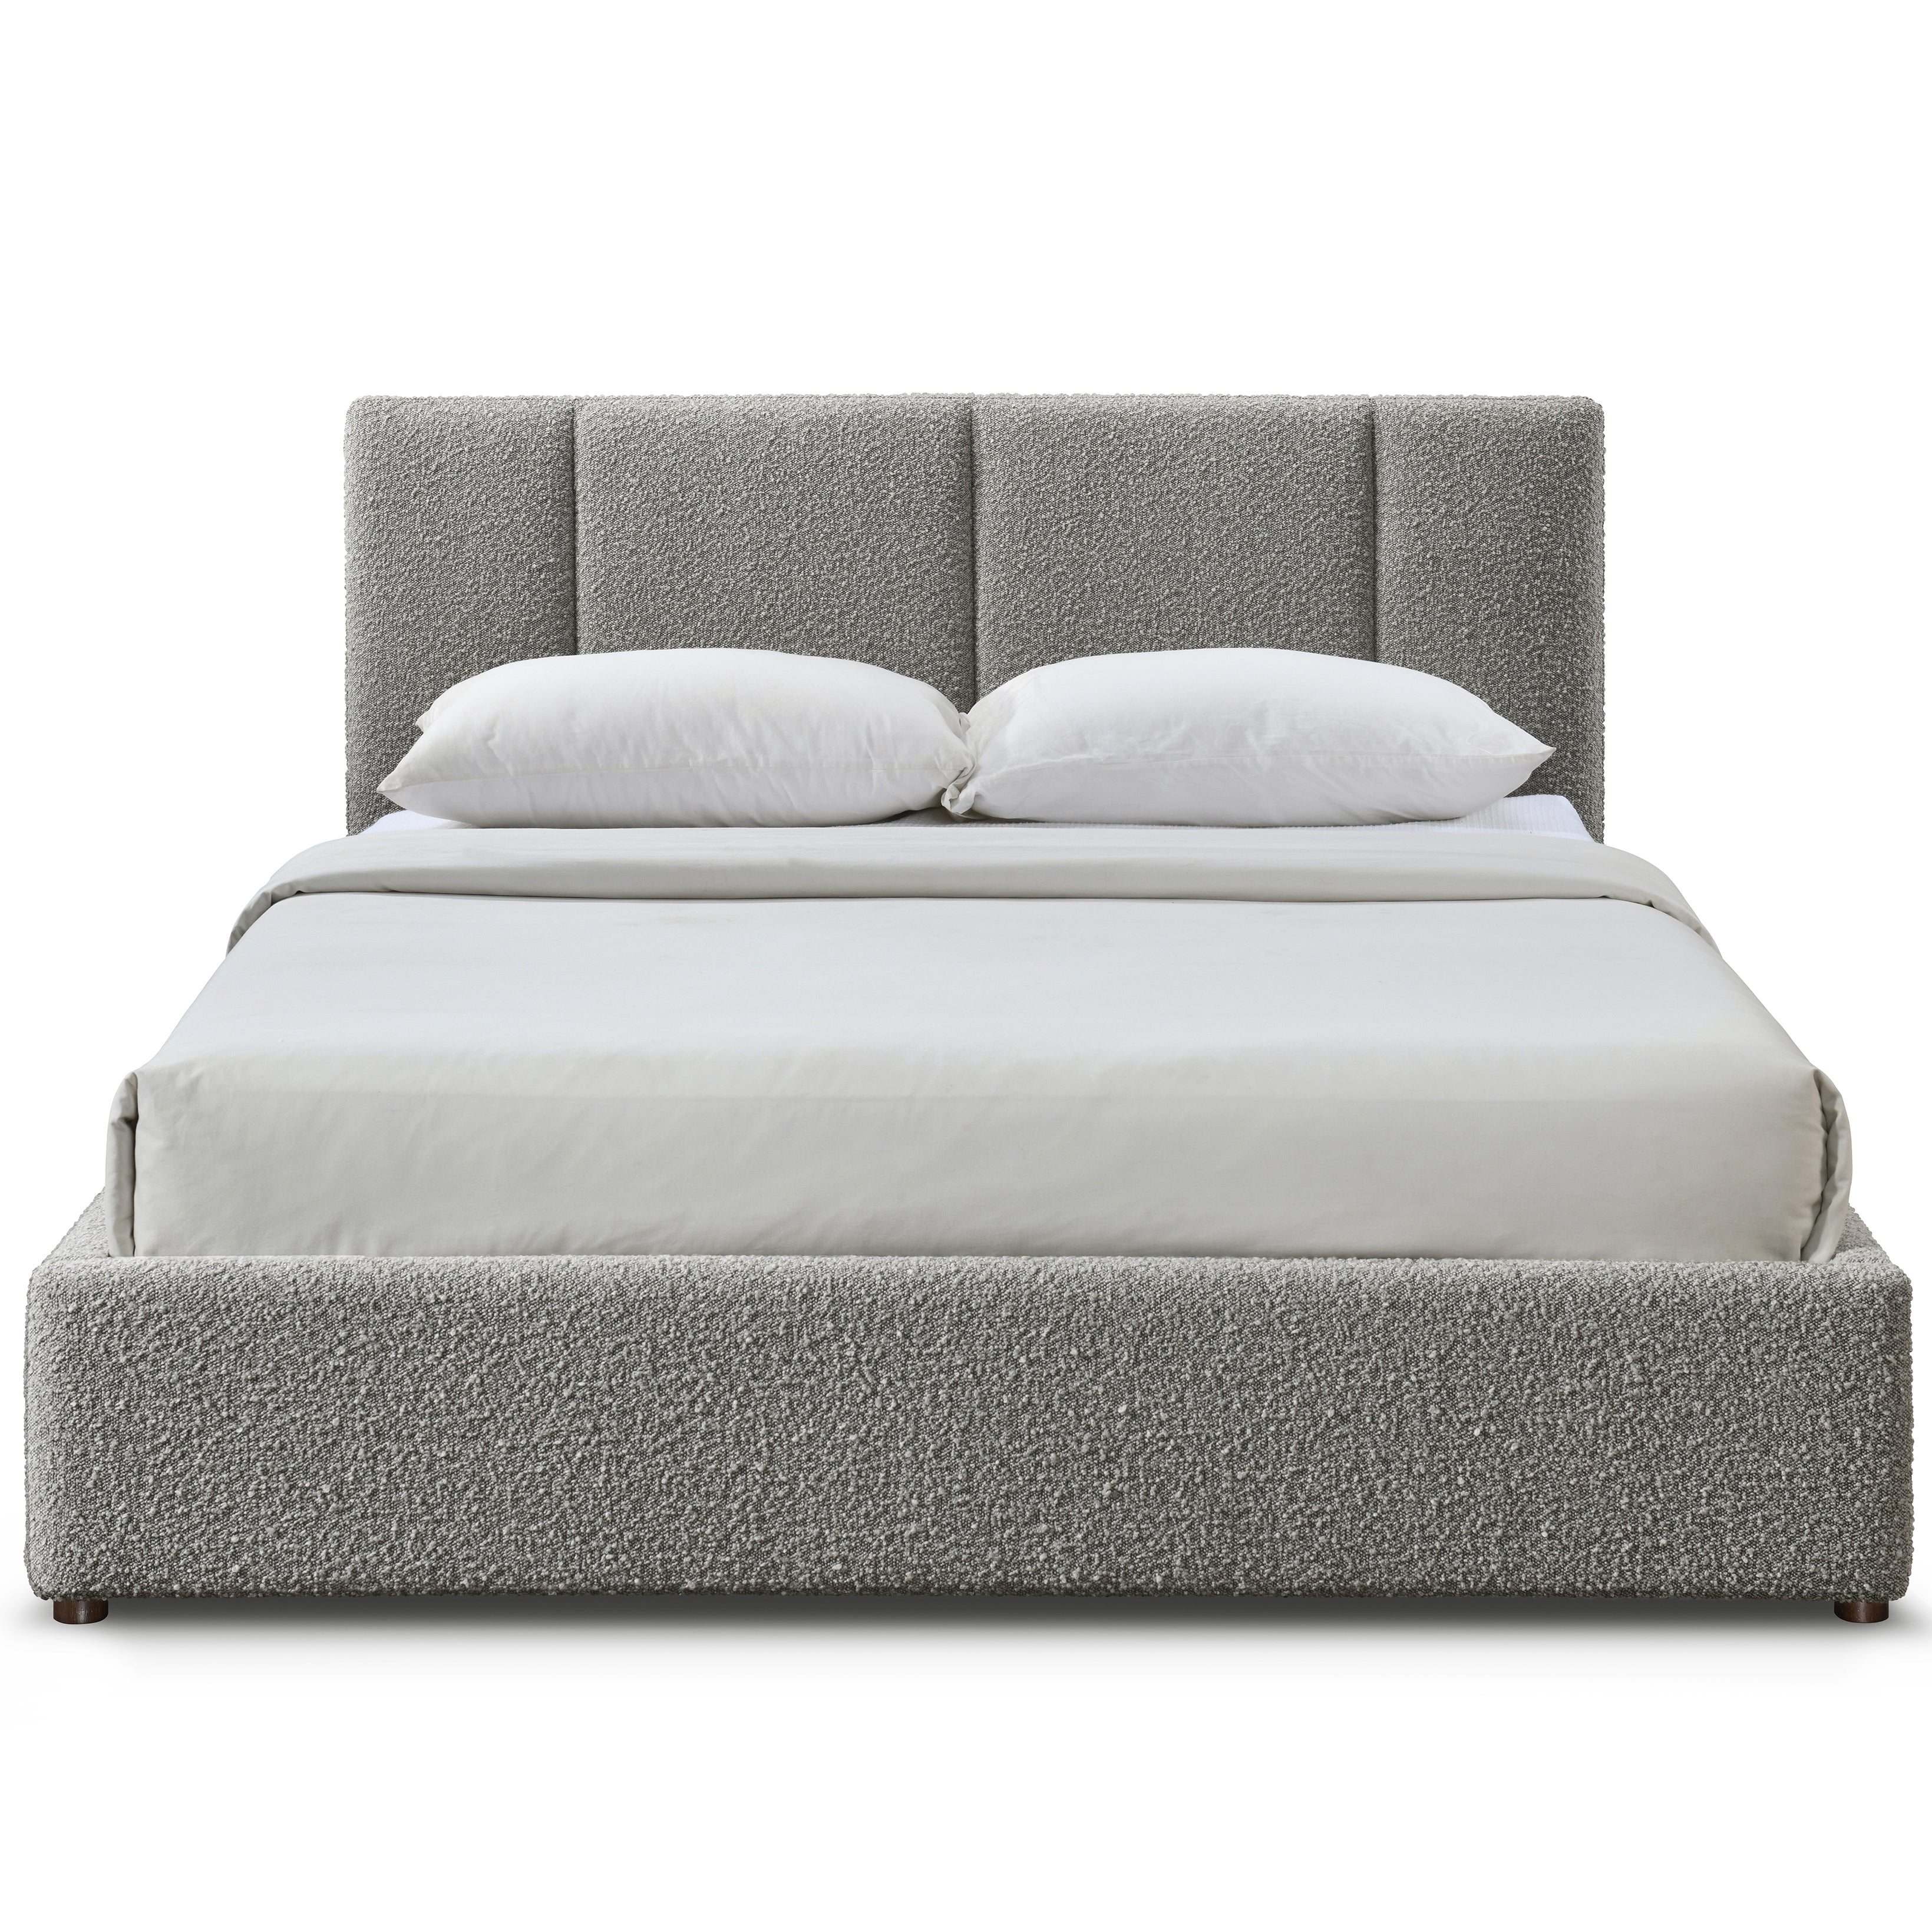 Venice Upholstered Platform Queen Bed, Gray Boucle Fabric